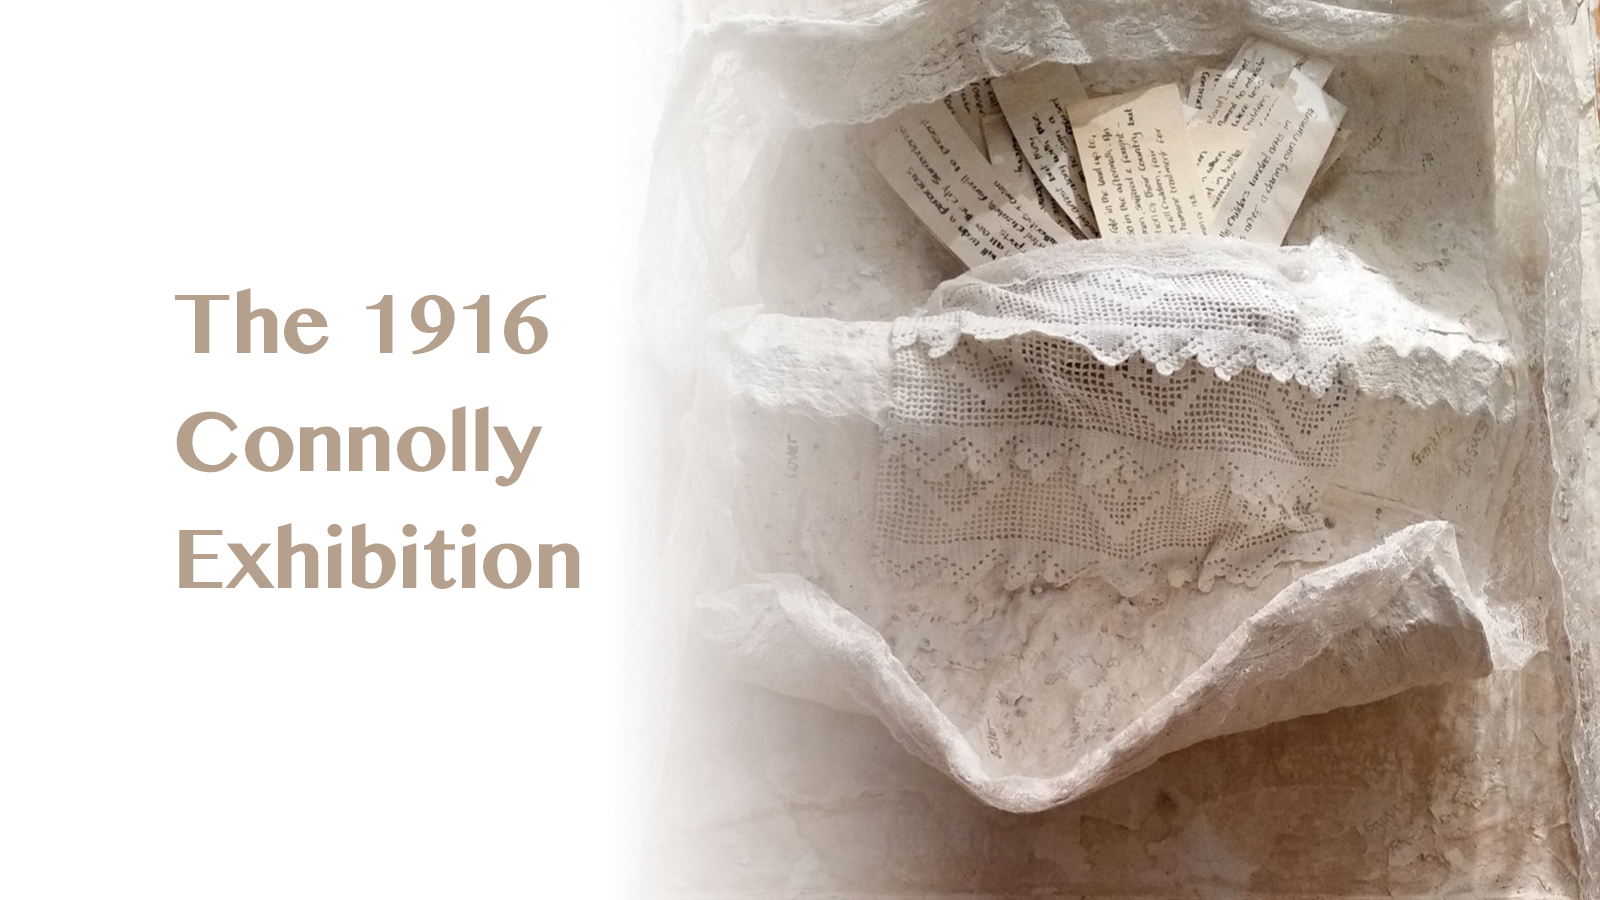 Exhibition Image - 1916 Connolly